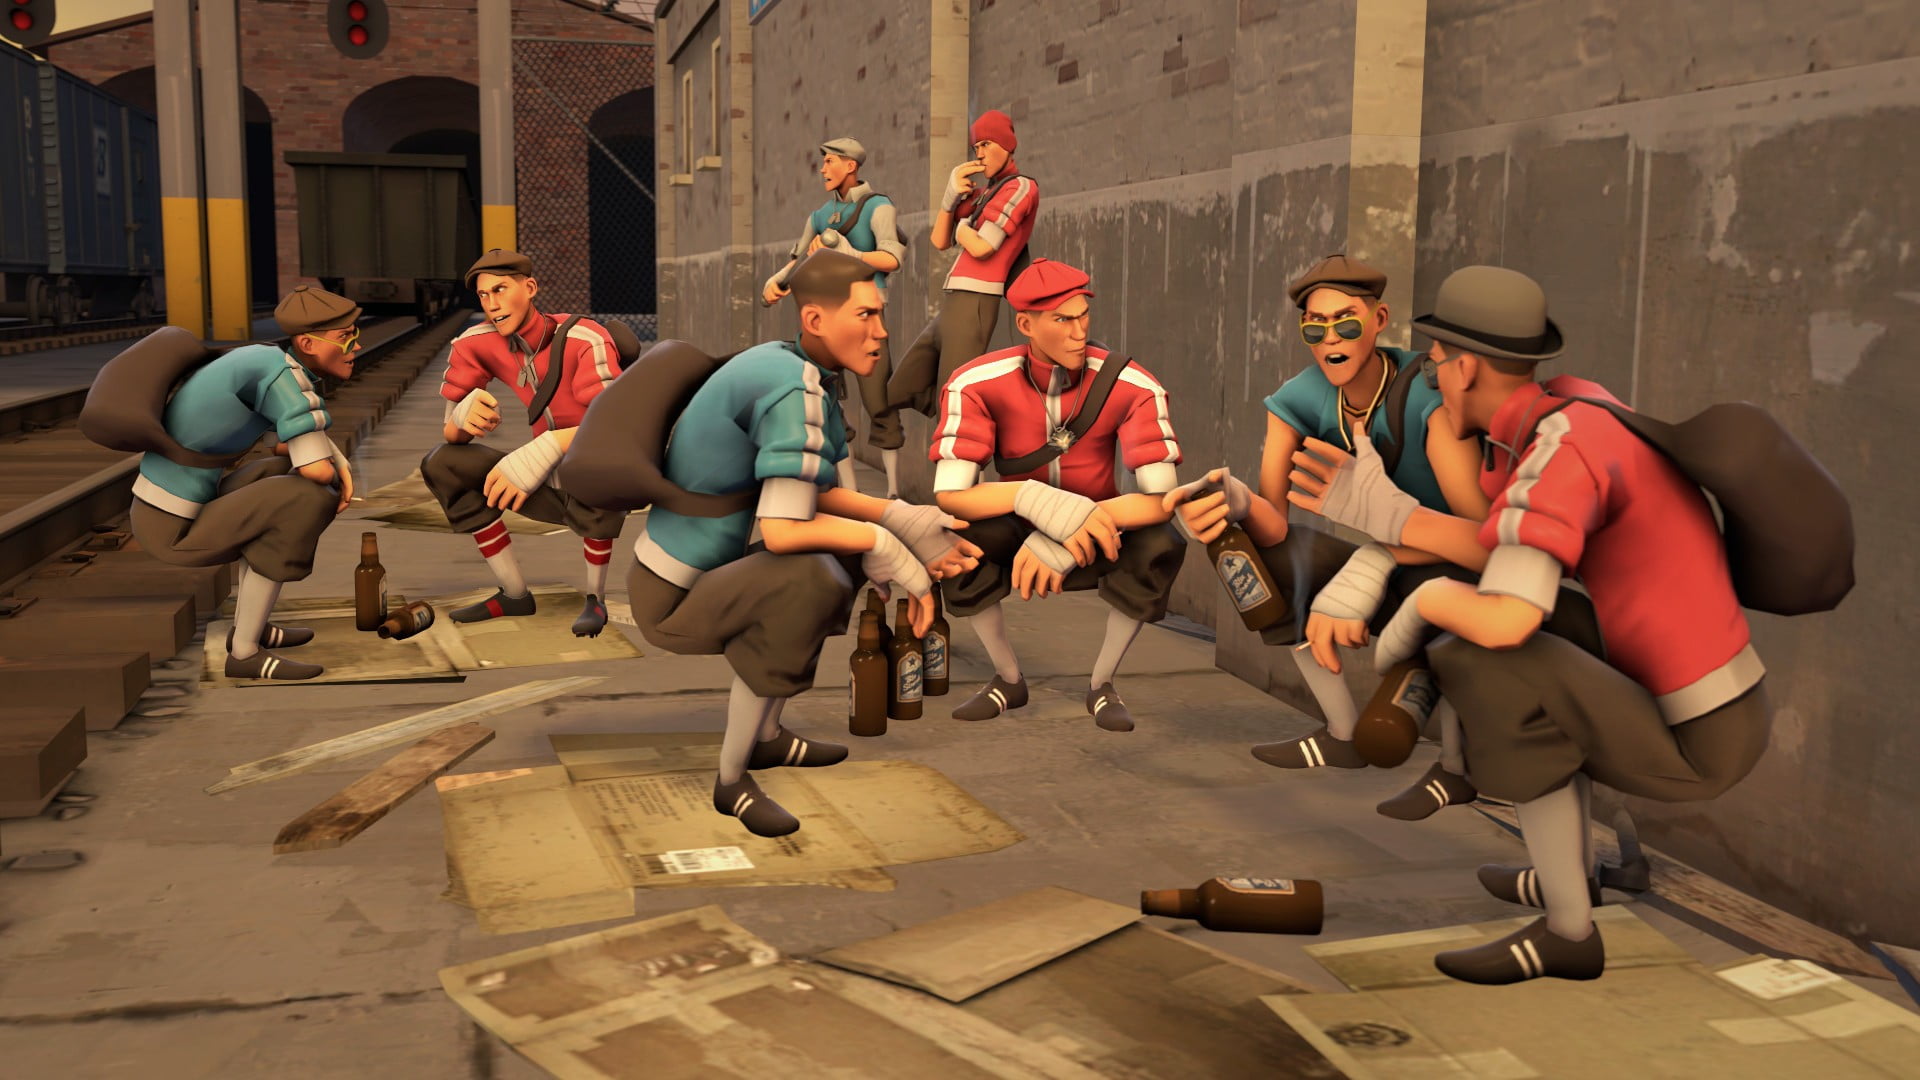 sitting men painting, Team Fortress 2, group of people, full length